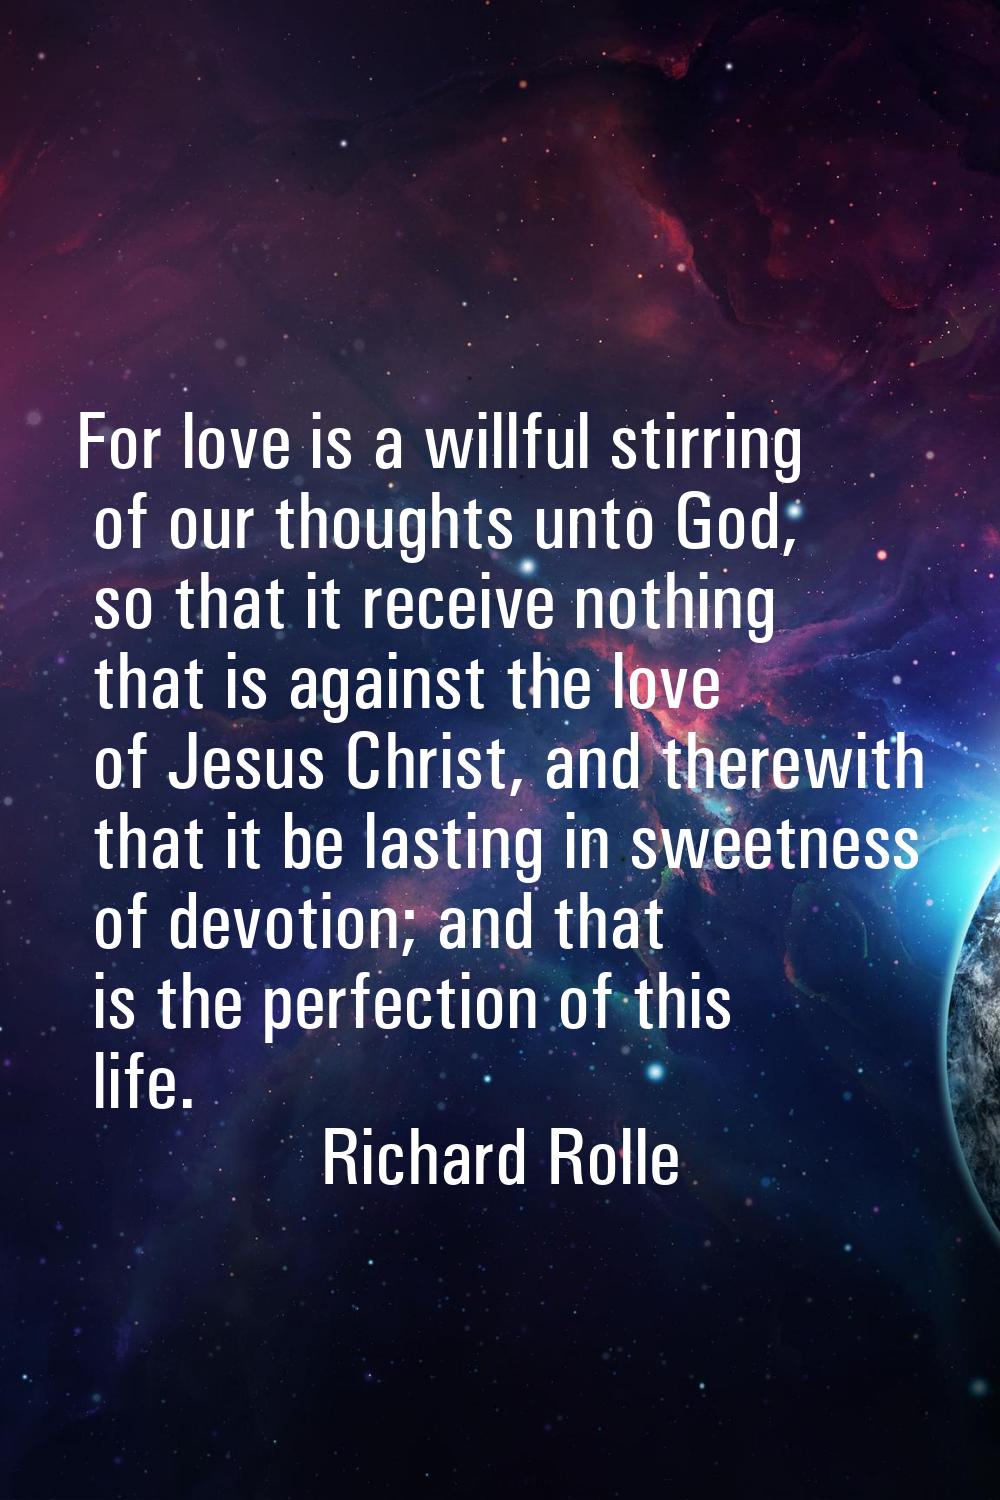 For love is a willful stirring of our thoughts unto God, so that it receive nothing that is against